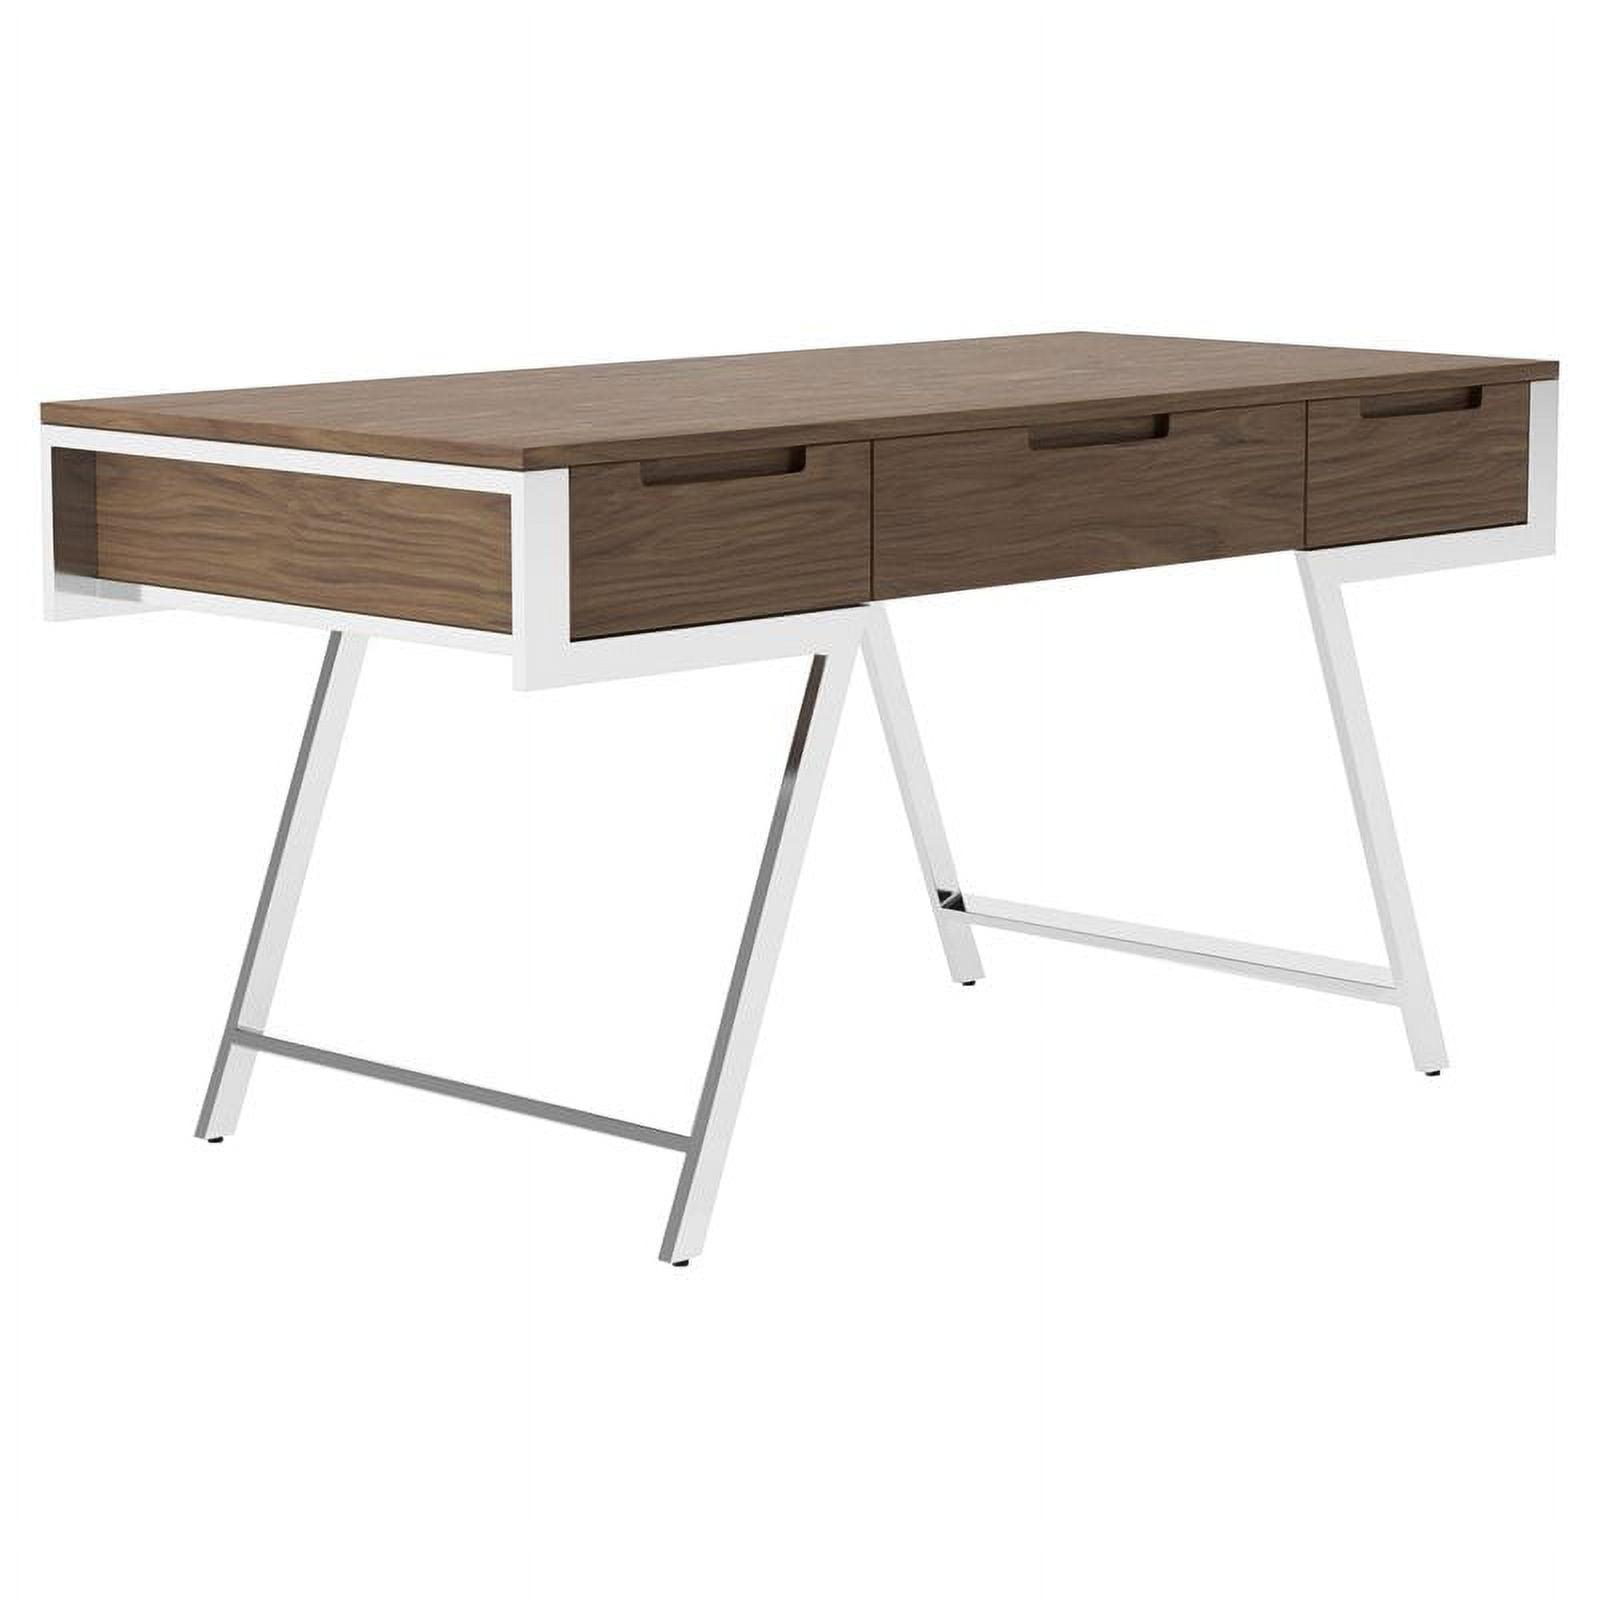 Walnut and Chrome Modern Desk with Drawers, 63"